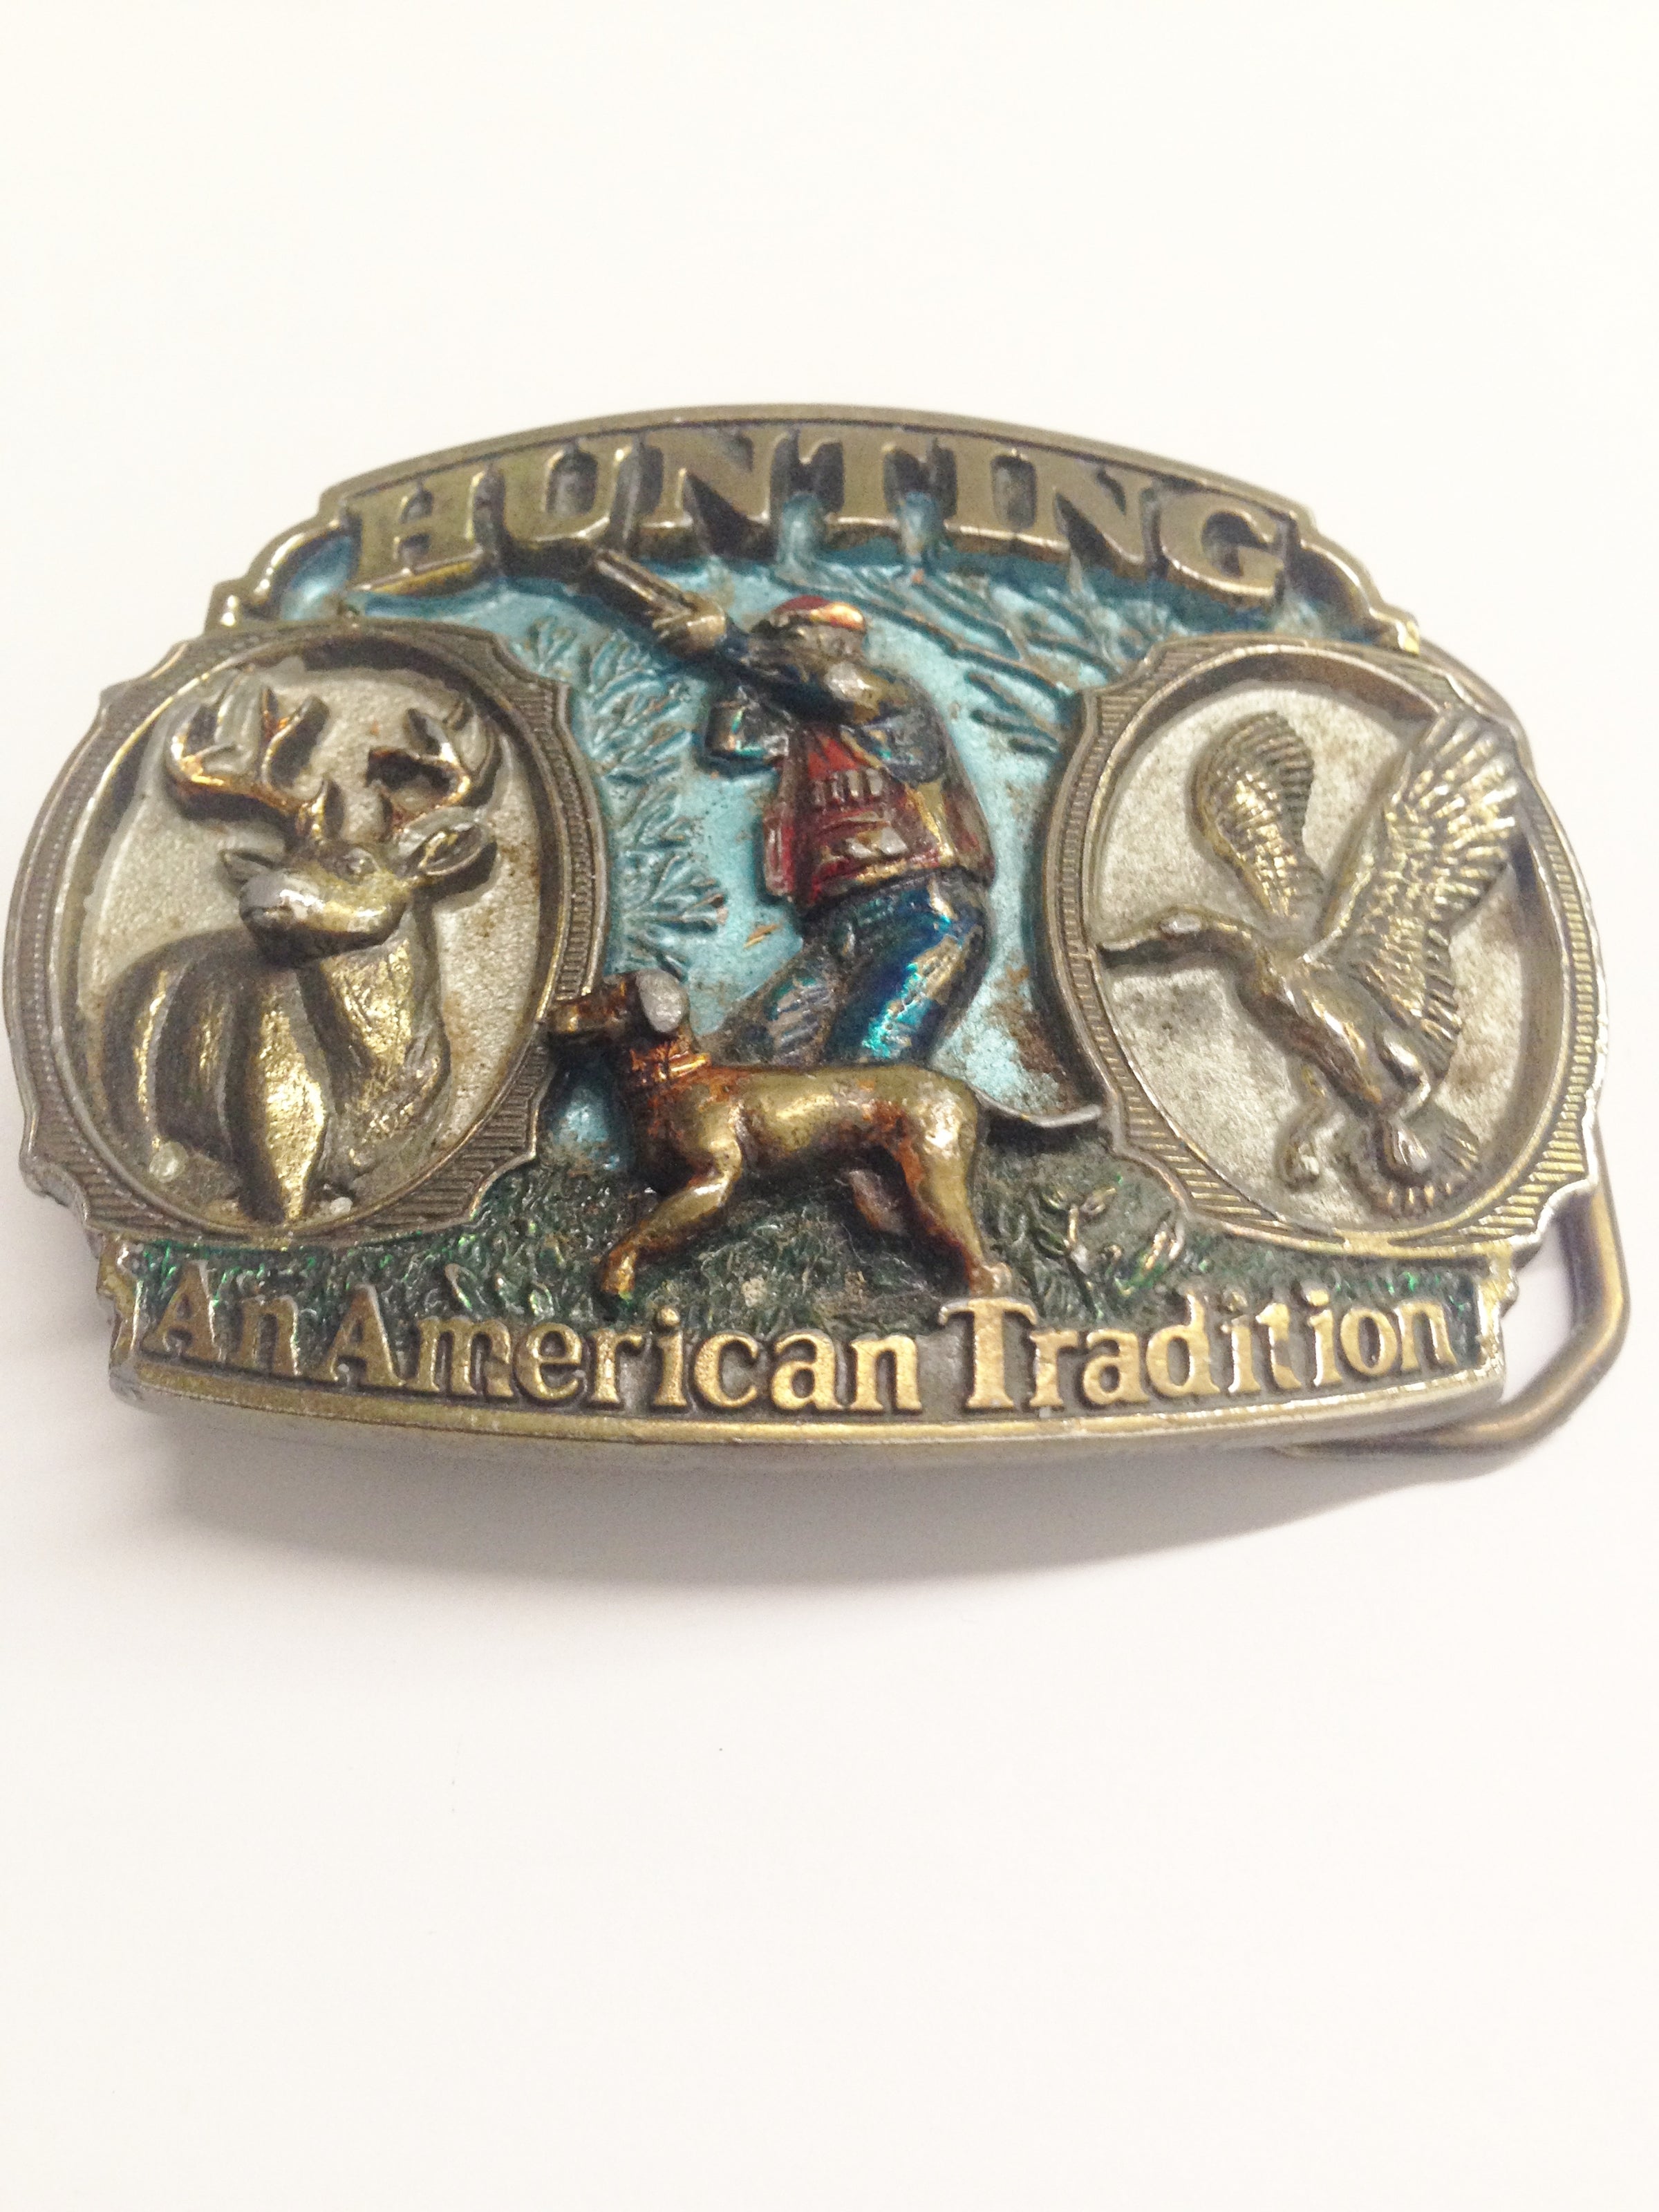 1986 Great American Belt Buckle Co. Hunting An American Tradition Belt Buckle